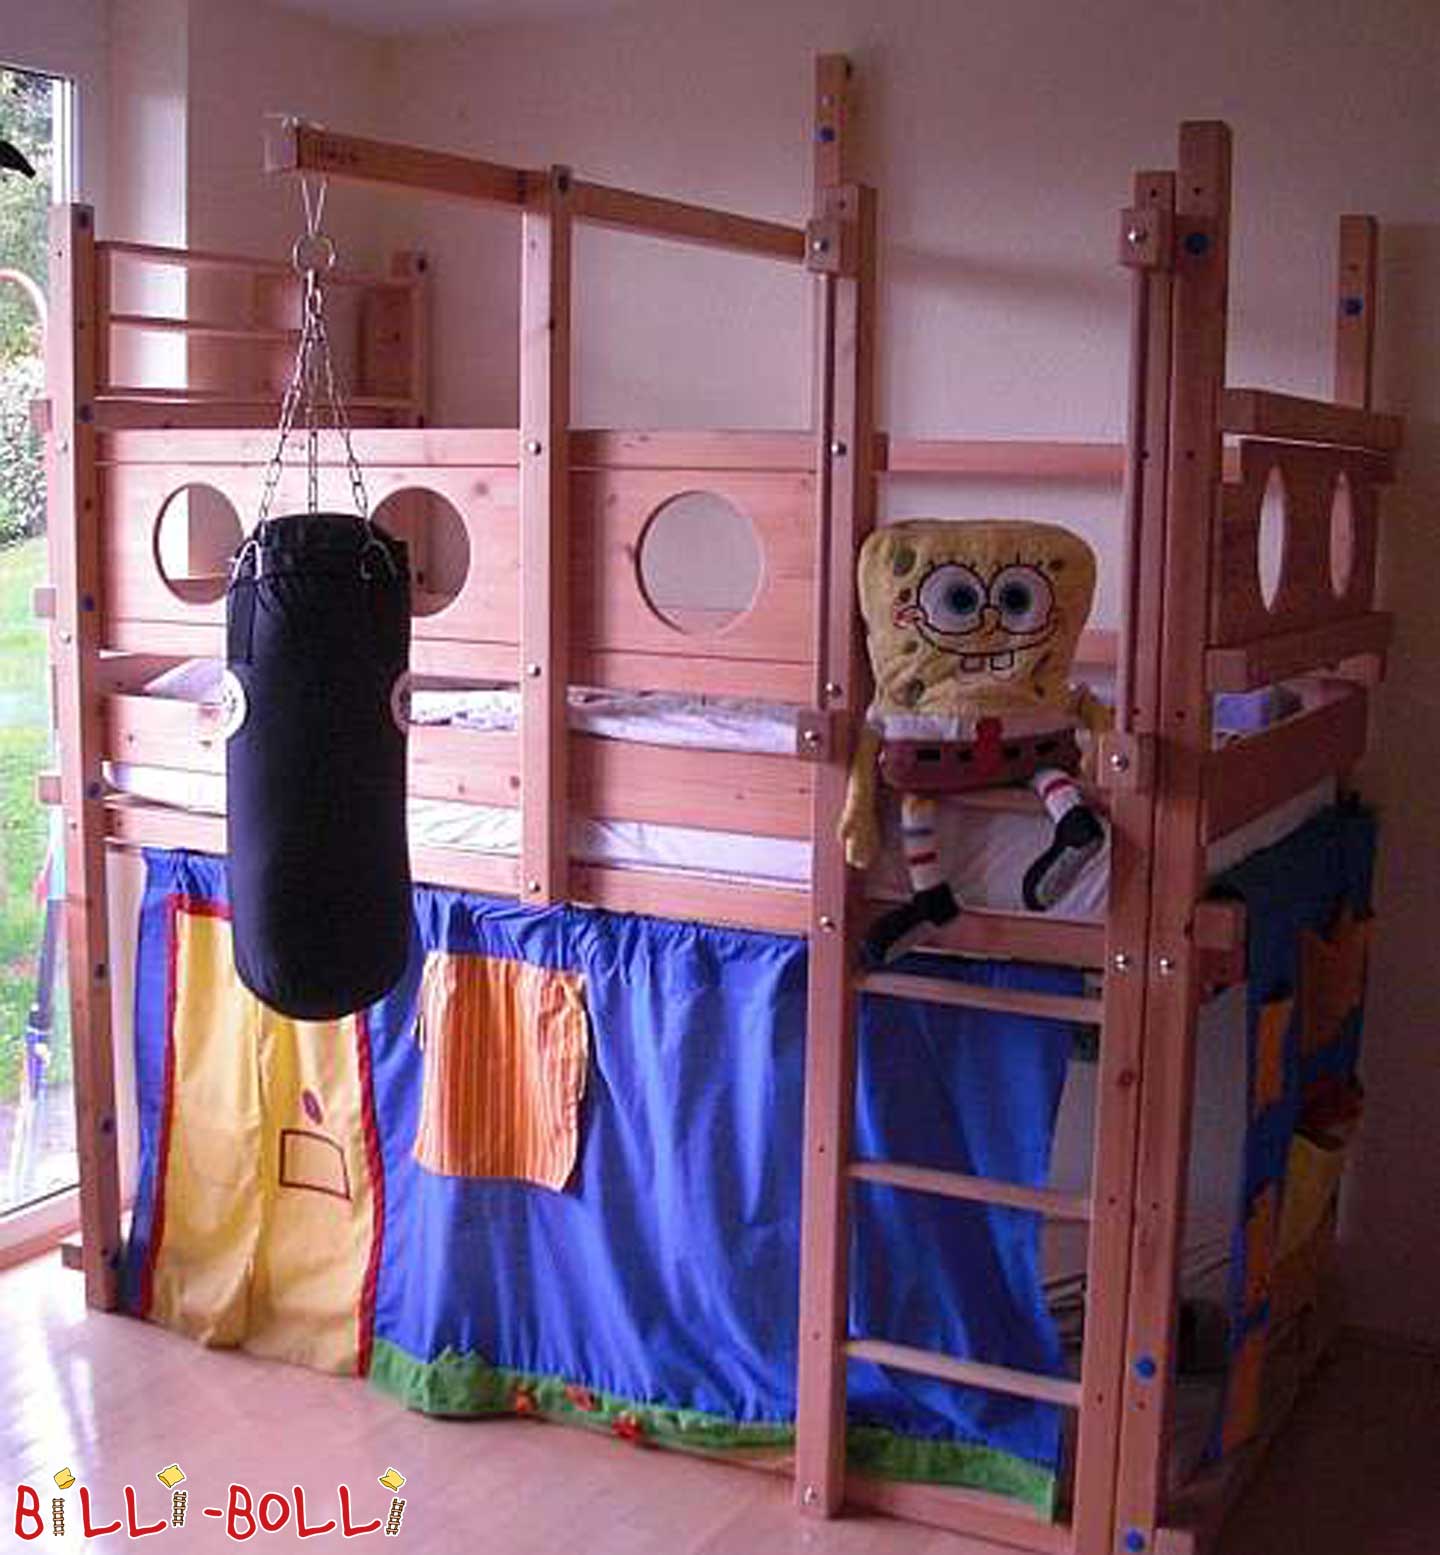 Baby cot (Category: second hand loft bed)